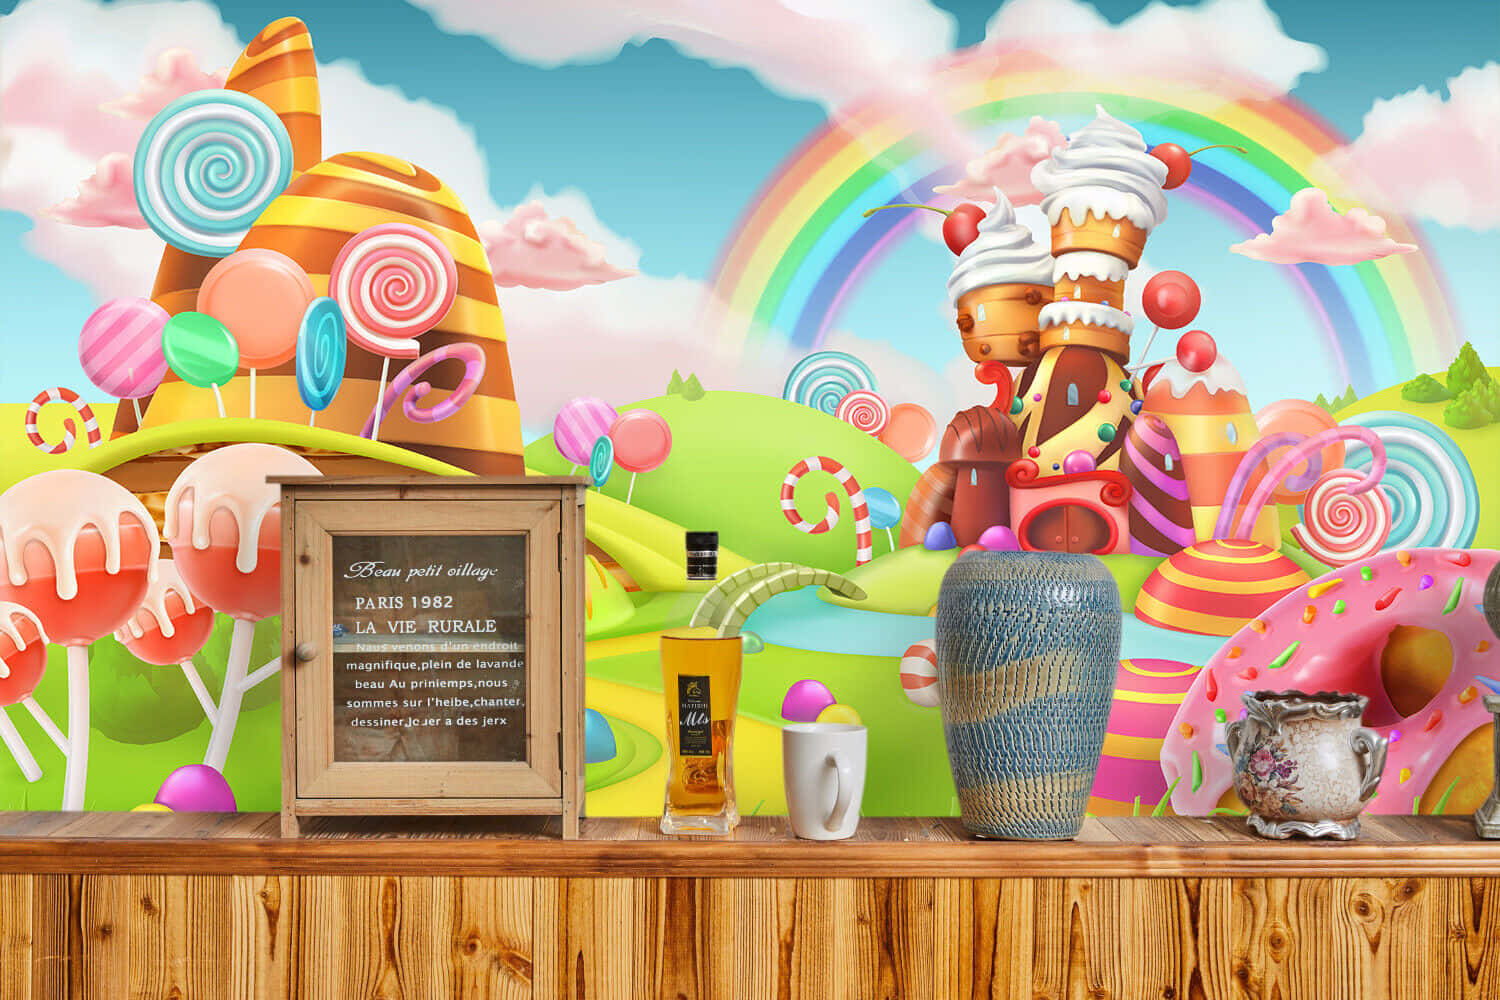 A child's dream come true - stepping into a world of sweets! Wallpaper